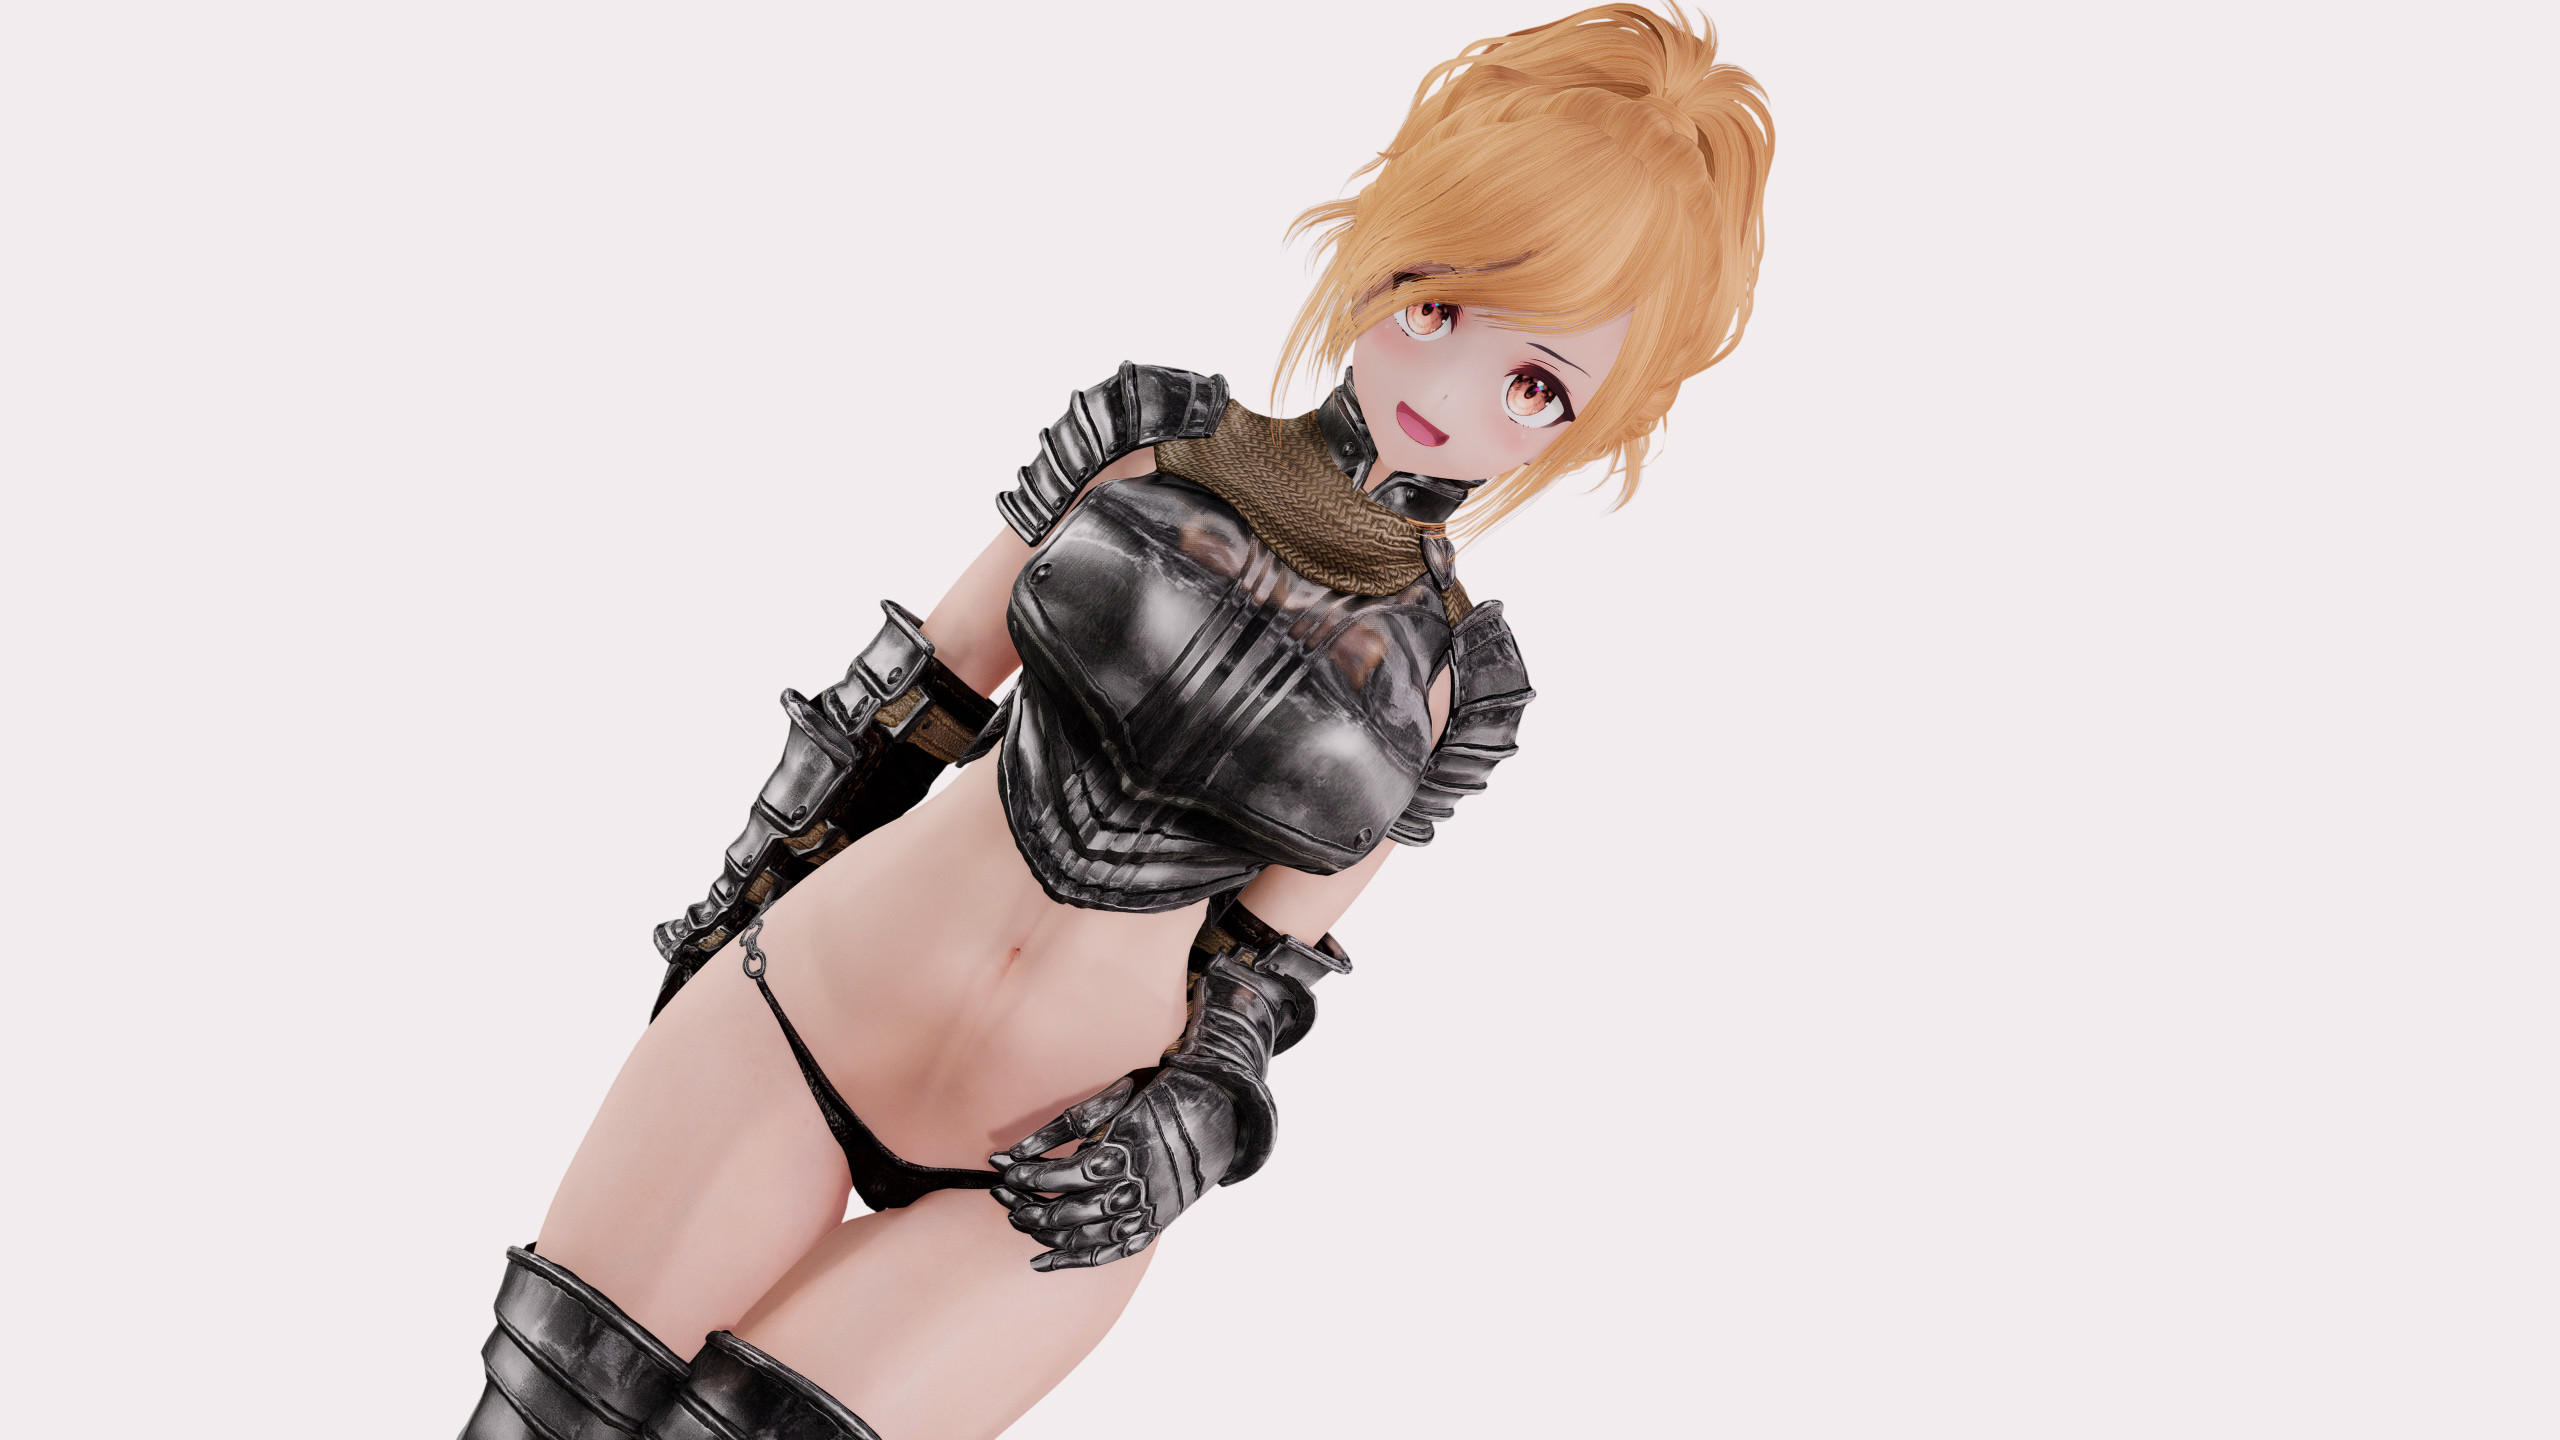 Modded outfits are a blessing : r/codevein